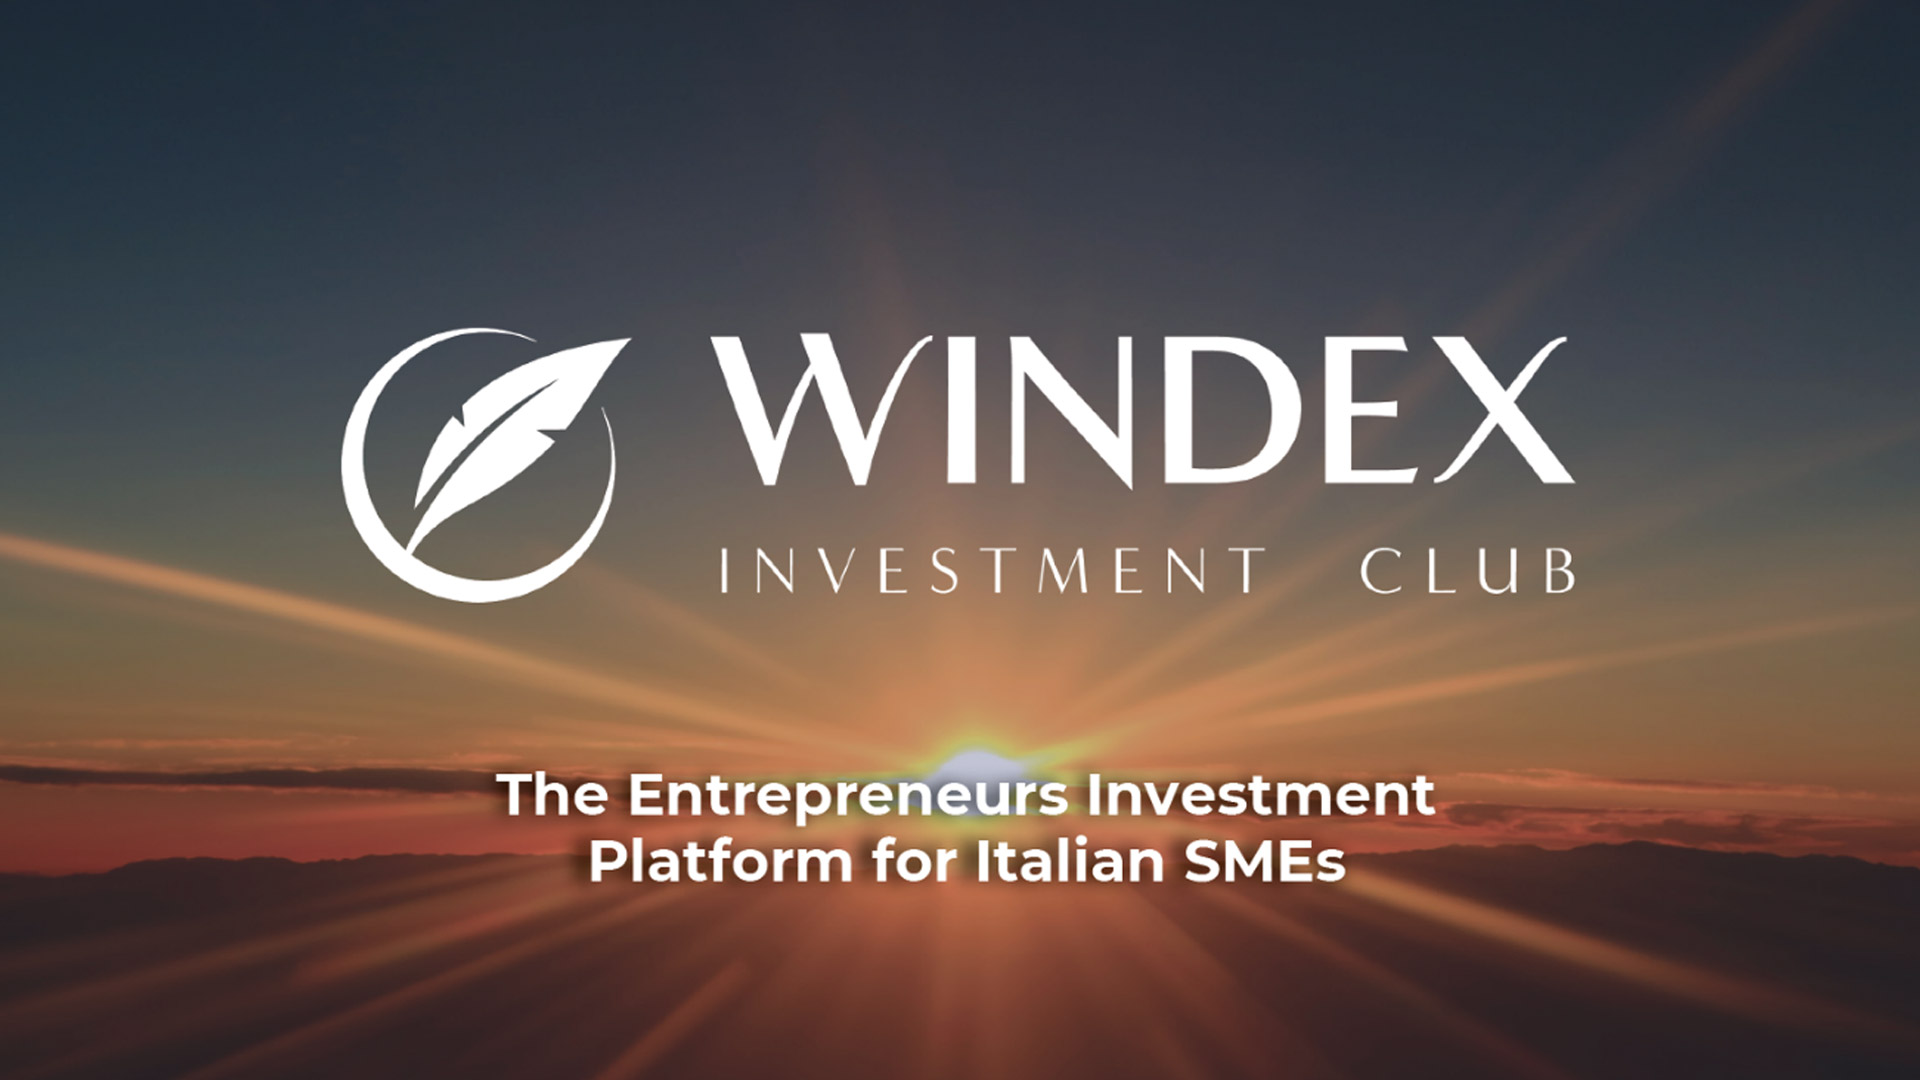 WindeX Investment Club has been incorporated